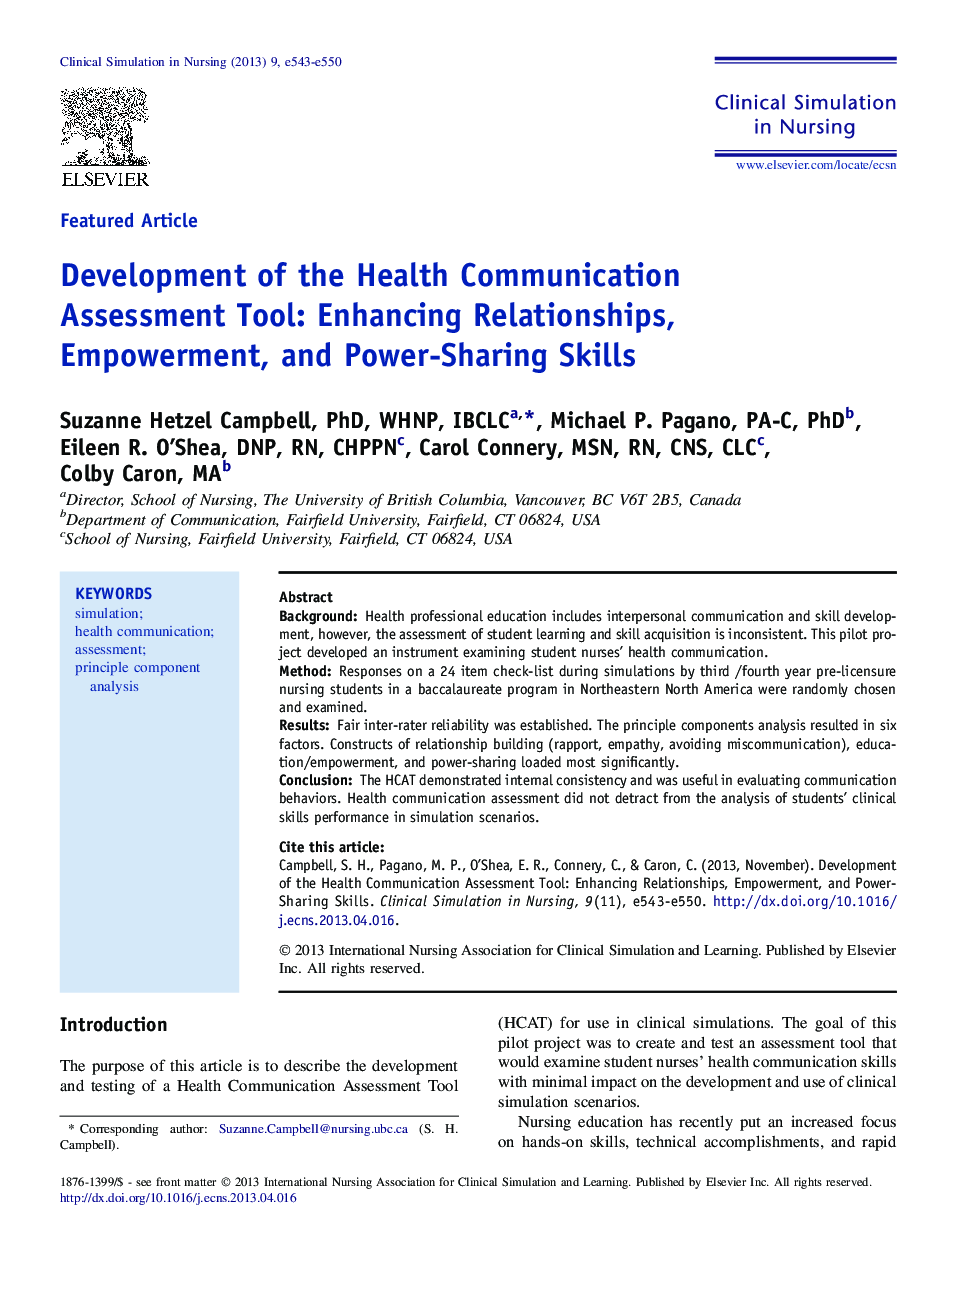 Development of the Health Communication Assessment Tool: Enhancing Relationships, Empowerment, and Power-Sharing Skills